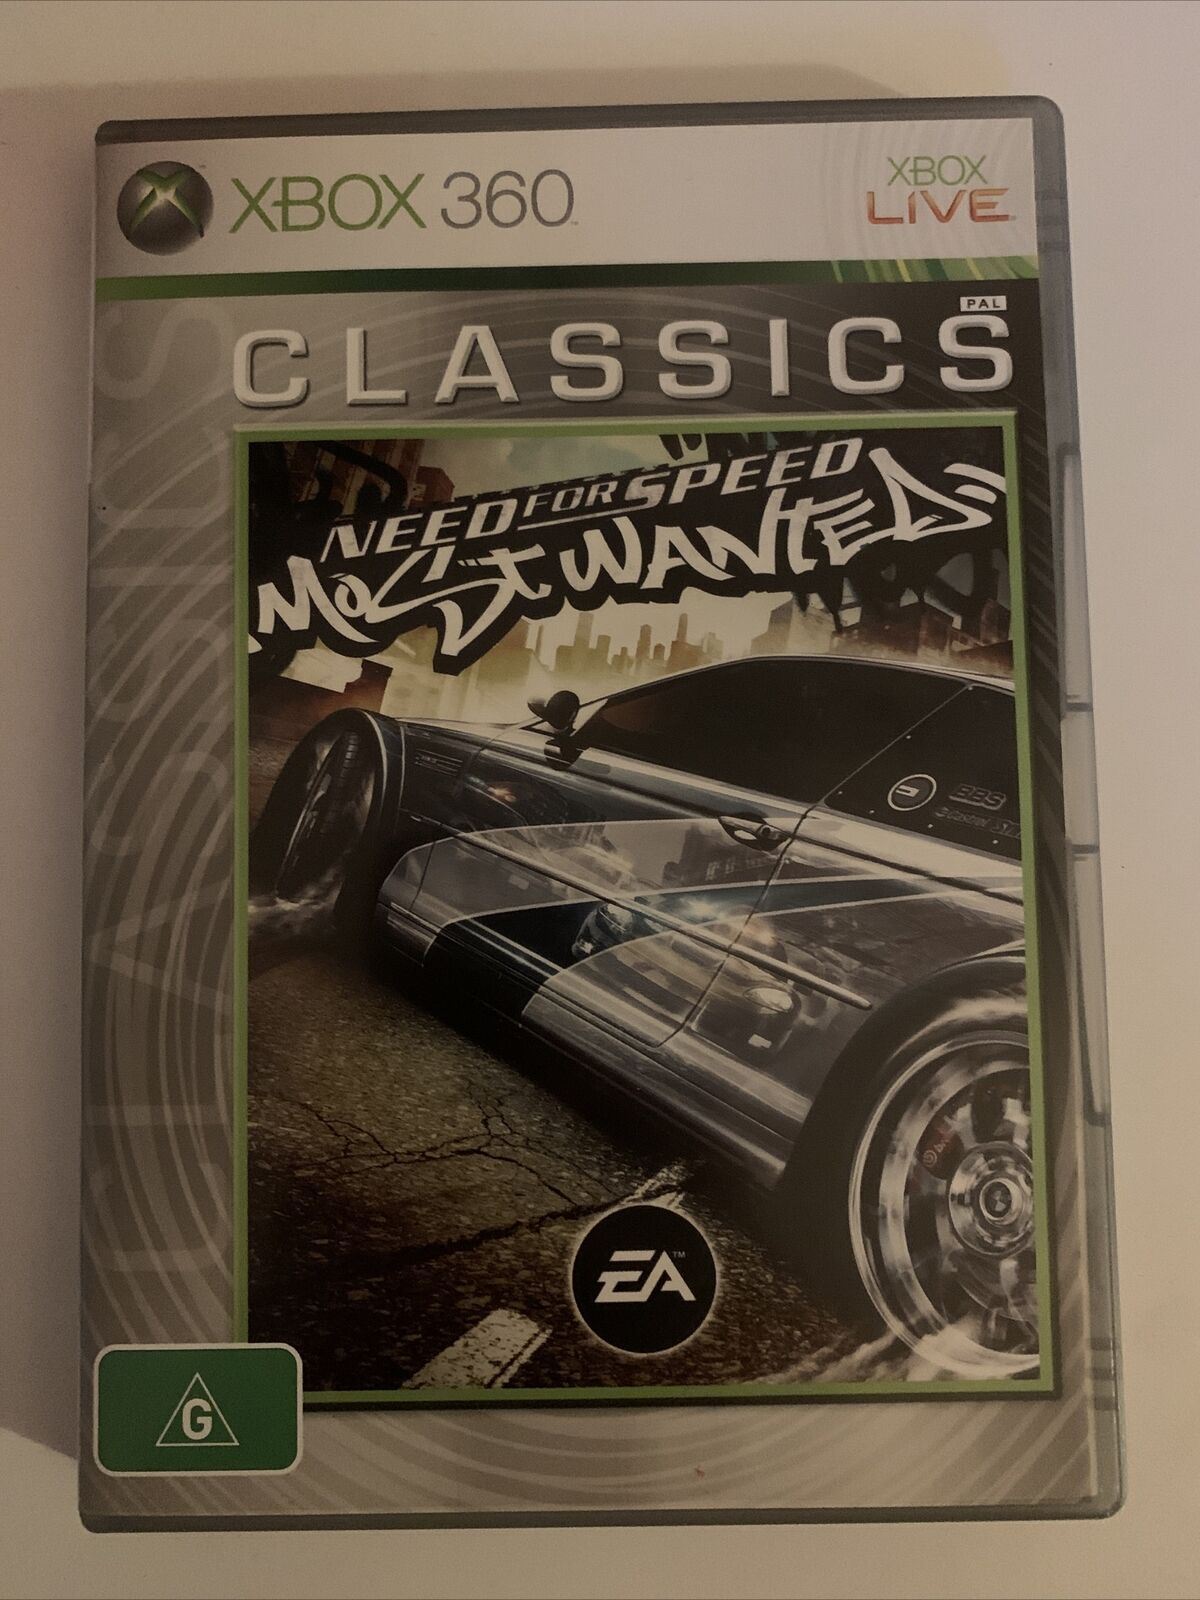 Need For Speed: Most Wanted - Microsoft XBOX 360 PAL Game